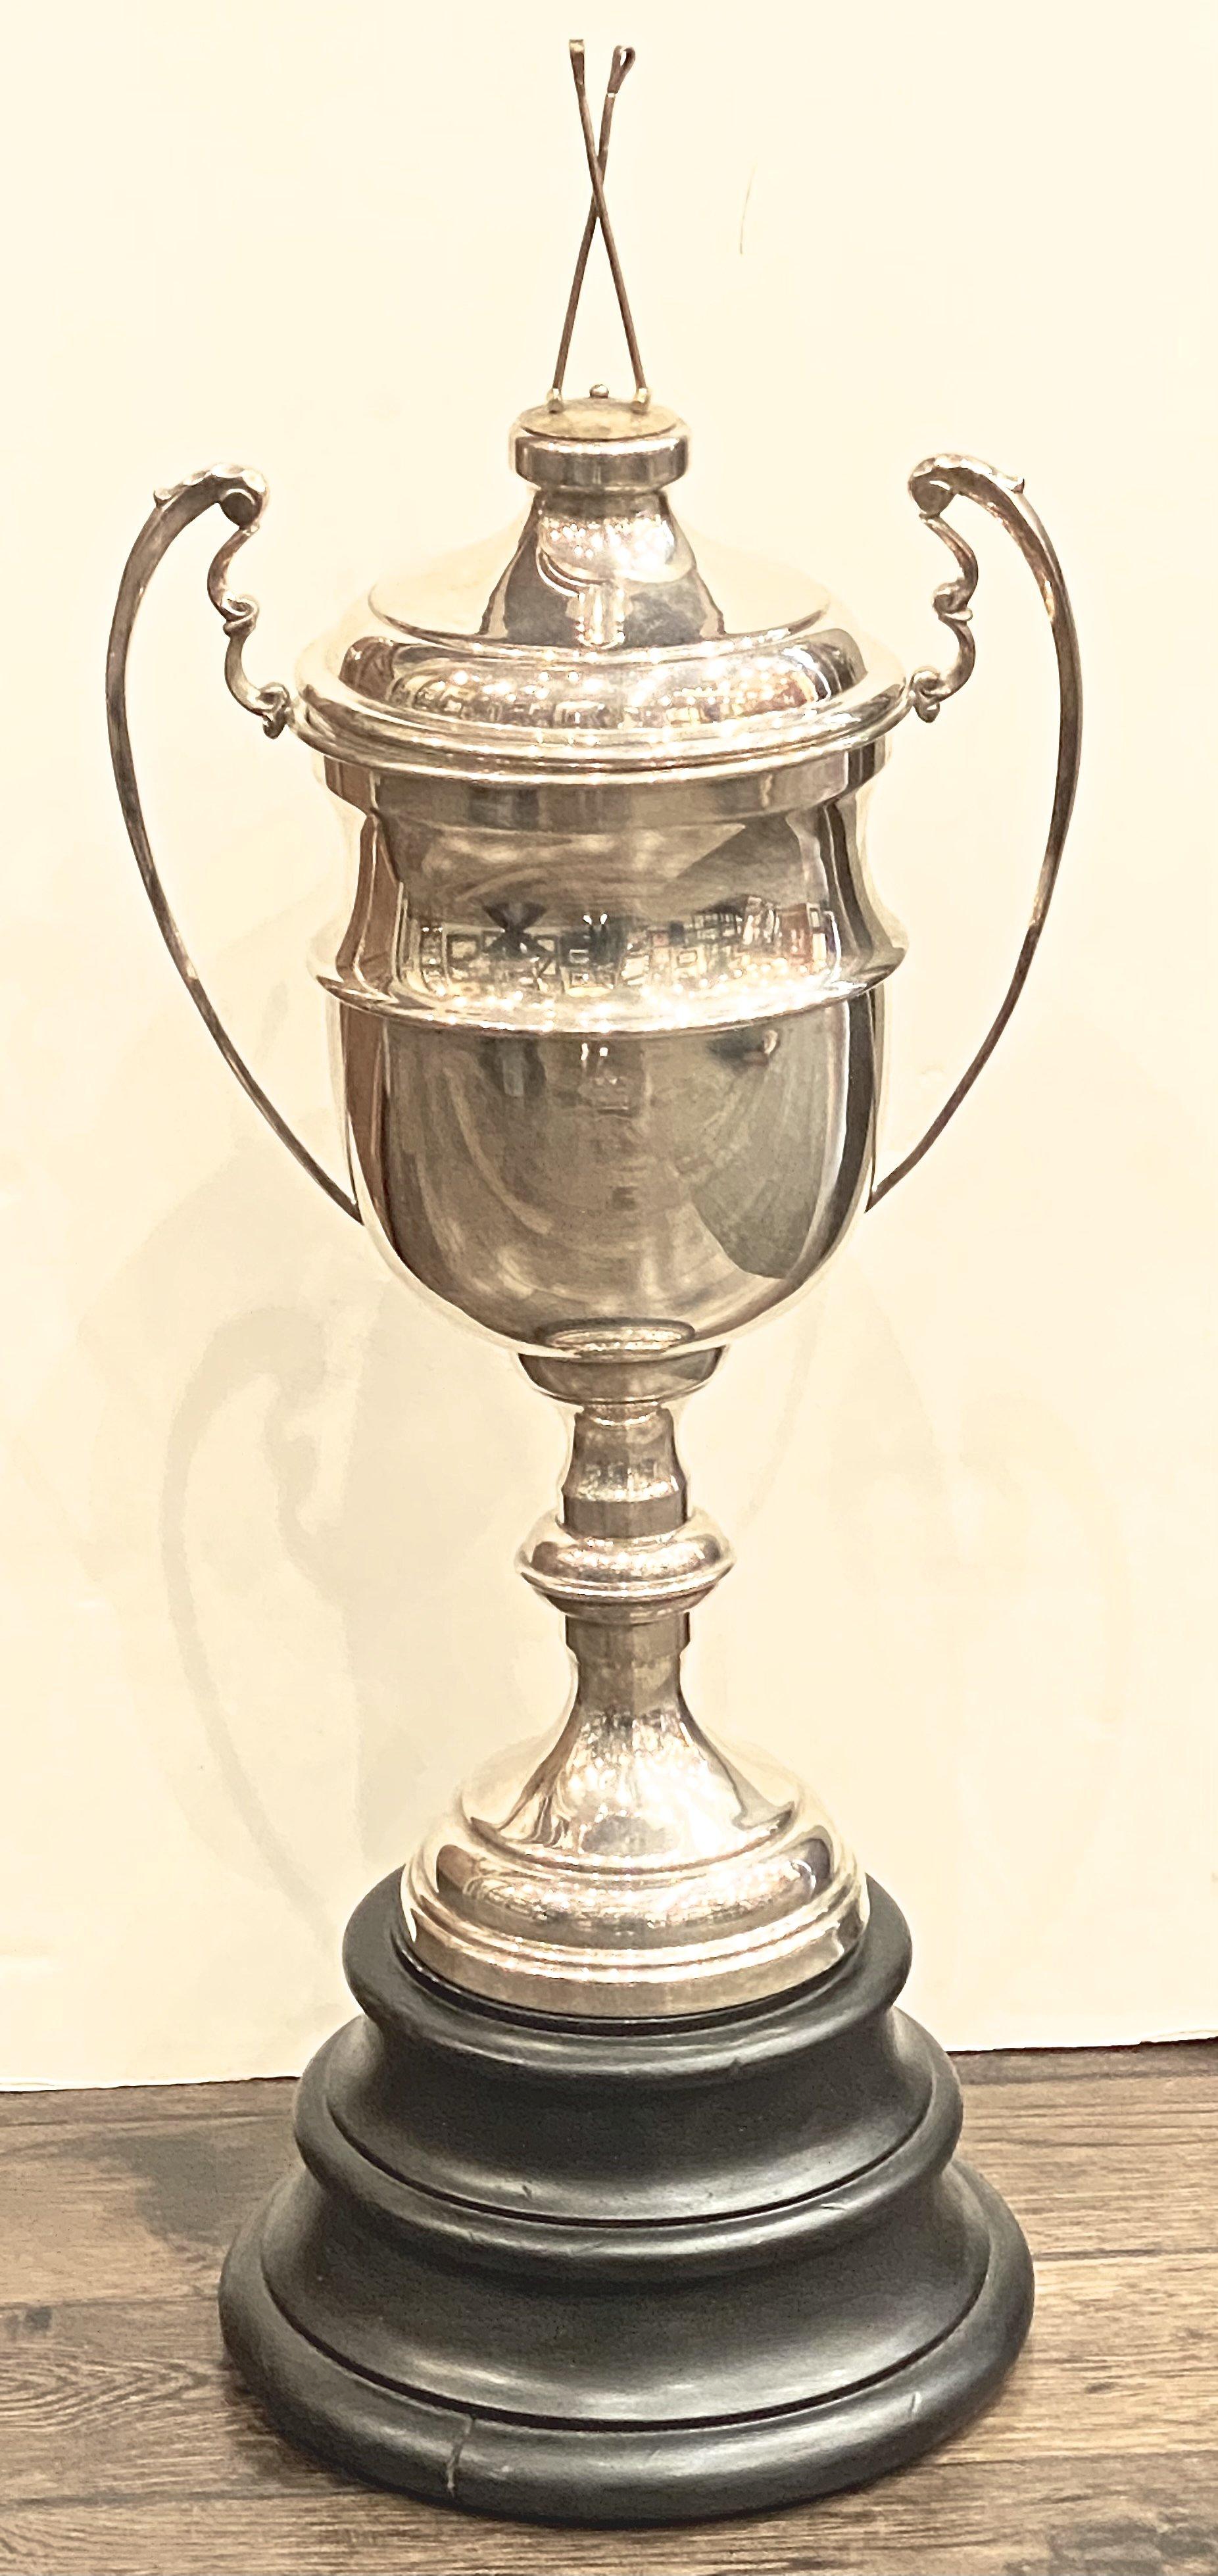 20th Century Silver Plated Polo Trophy with Wooden Base, Circa 1910-1920